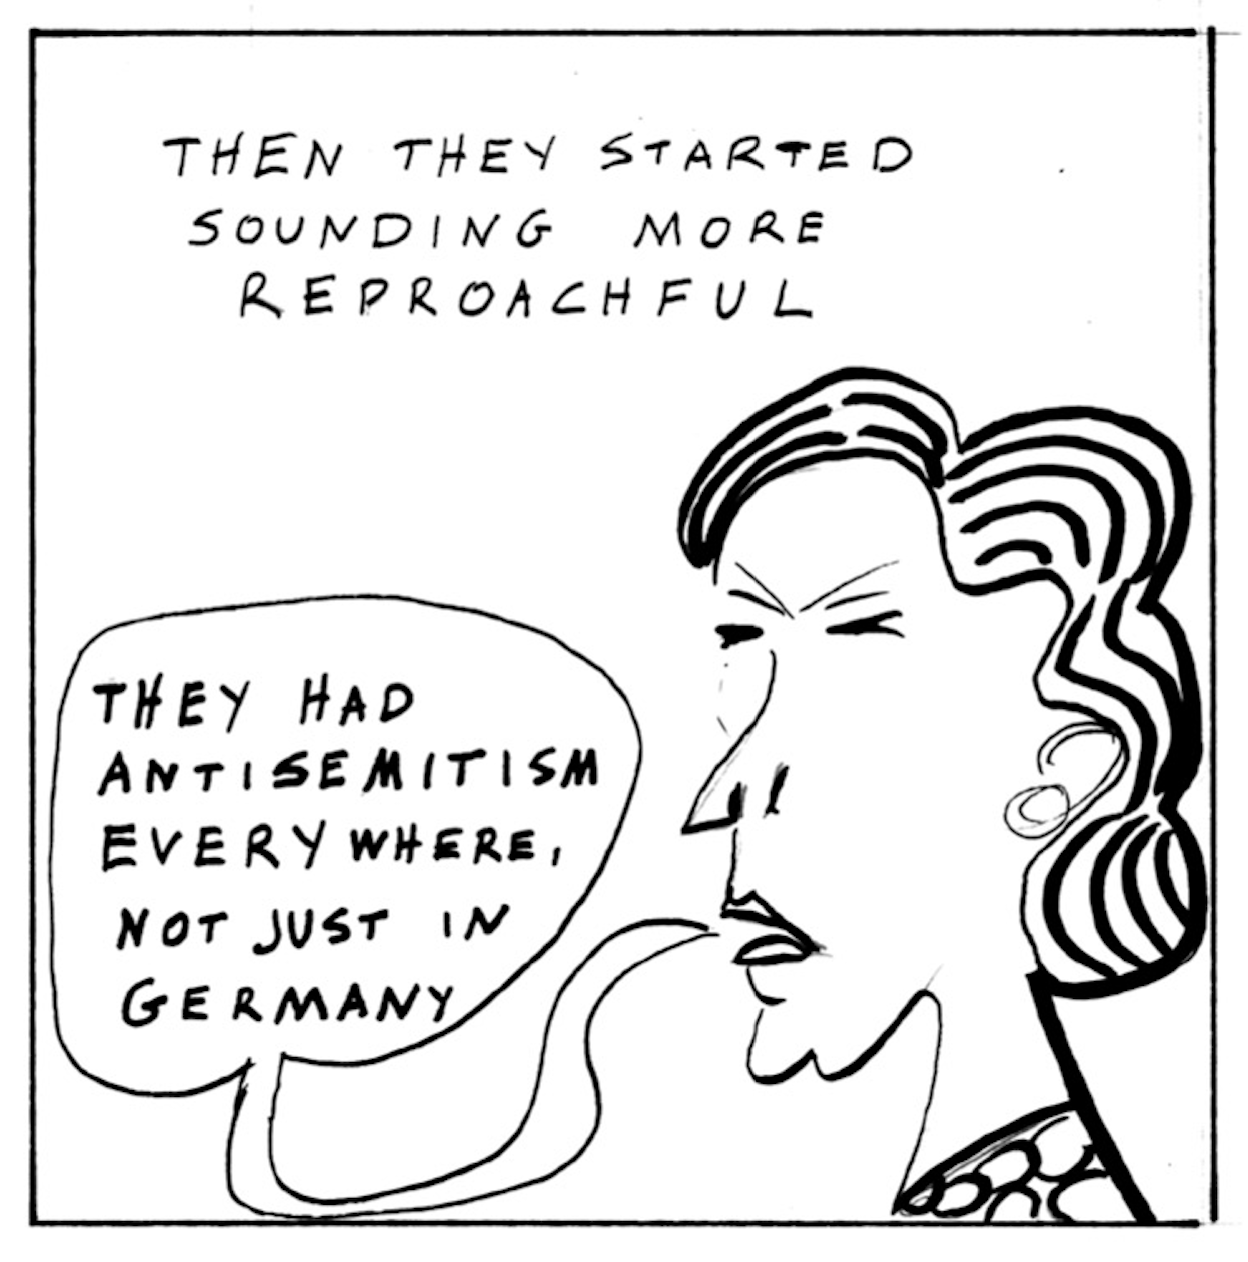 â€œThen they started sounding more reproachful.â€ Marlies says, â€œThey had antisemitism everywhere, not just in Germany.â€